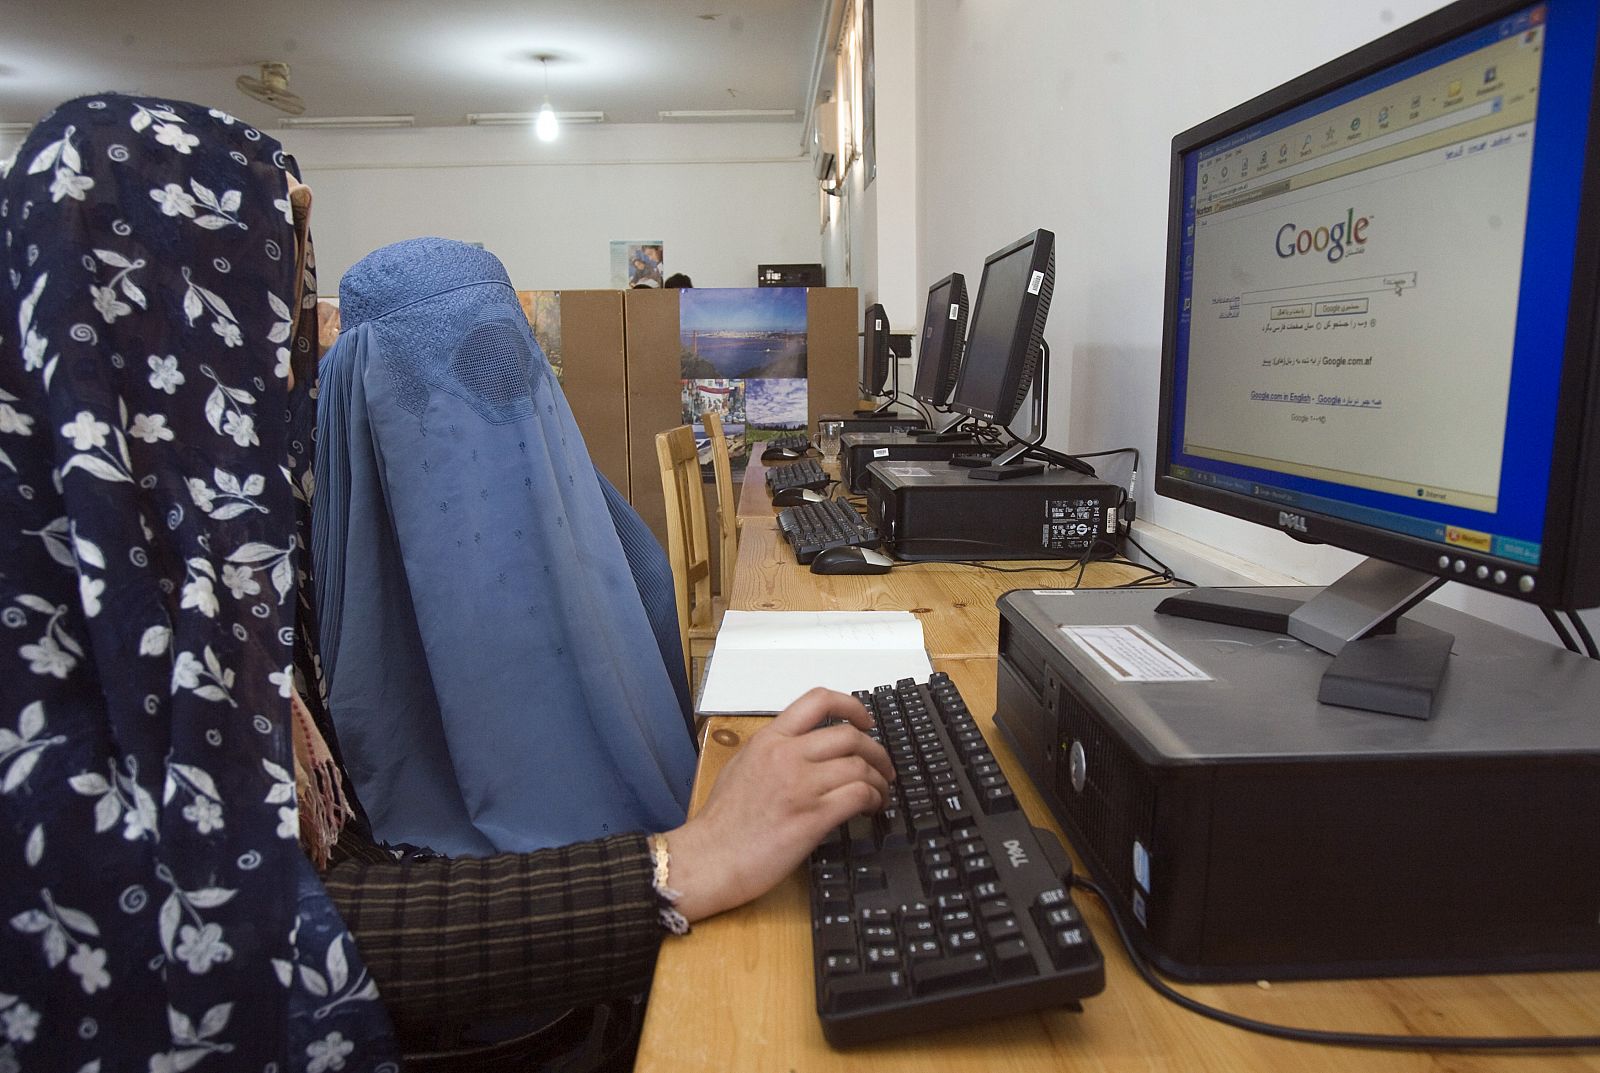 Afghan women use the Internet at the Lincoln U.S. support library in Herat